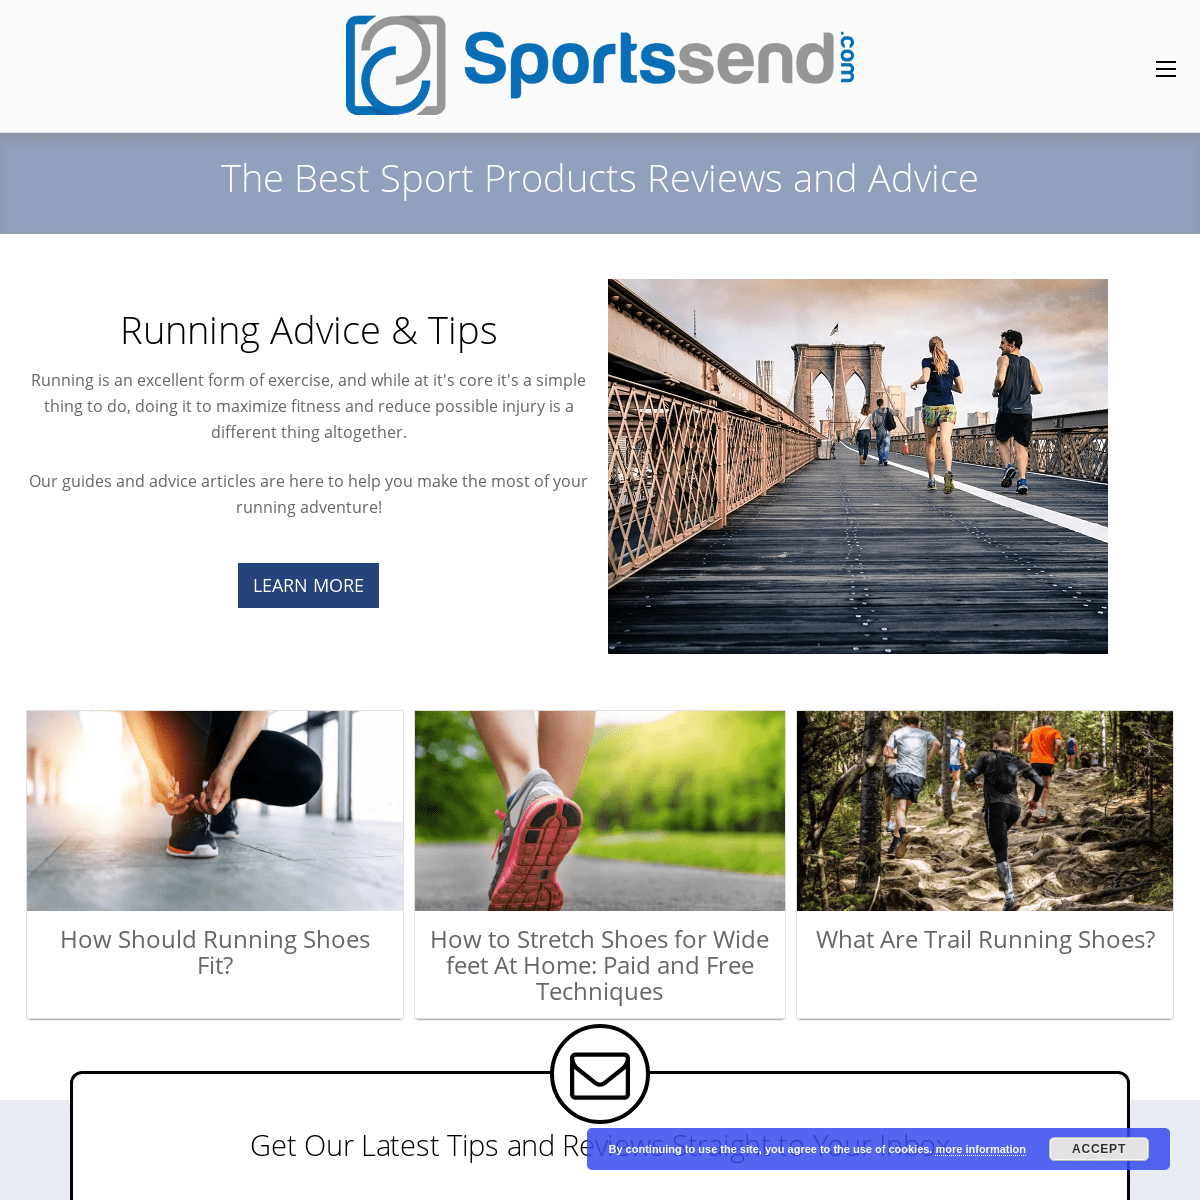 A complete backup of sportssend.com